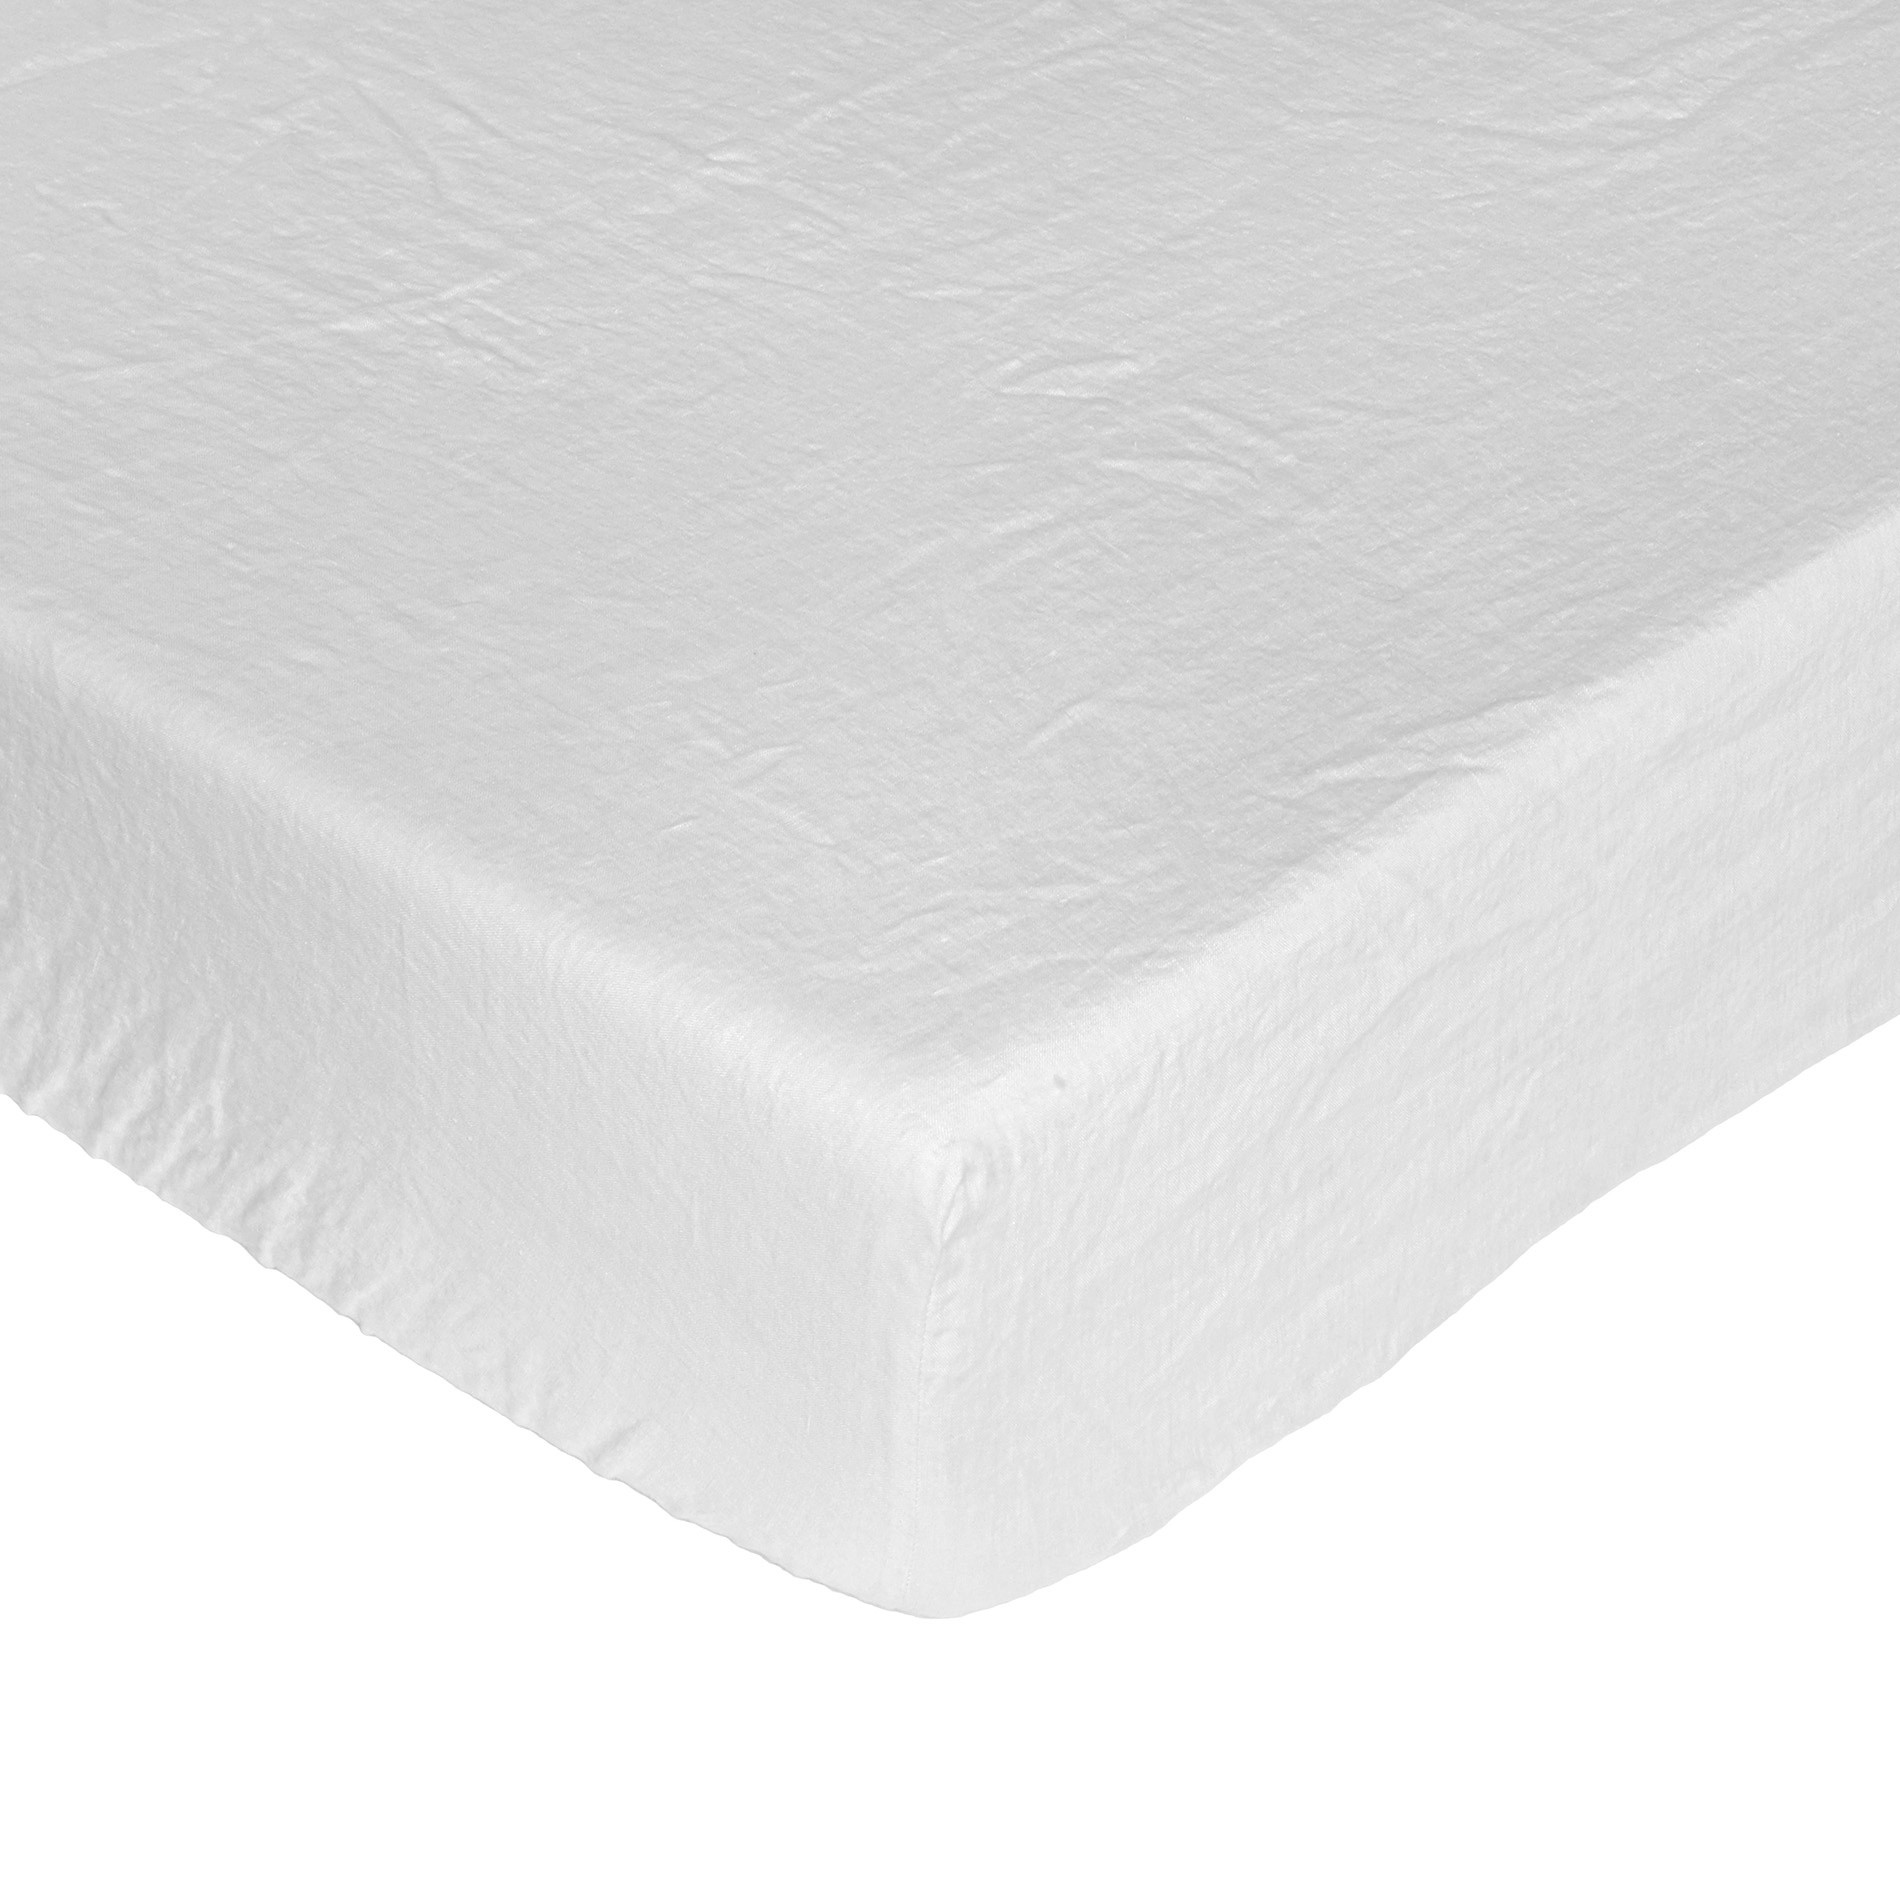 Plain fitted sheet in 145 g linen, White, large image number 0